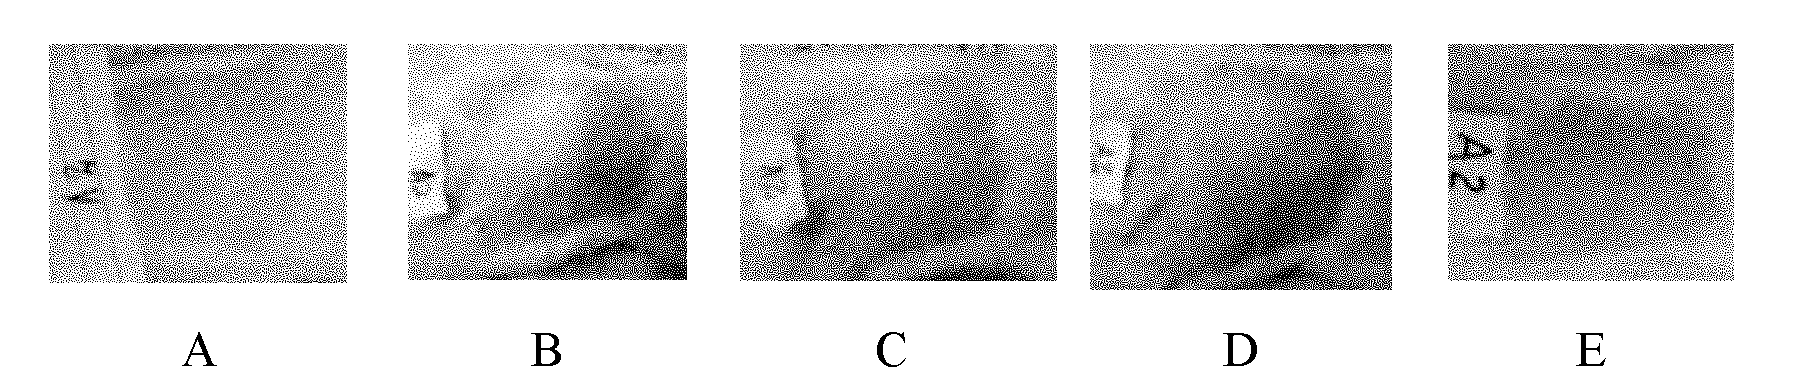 Hydrogel dressing containing recombinant human epidermal growth factor and preparation method and application thereof